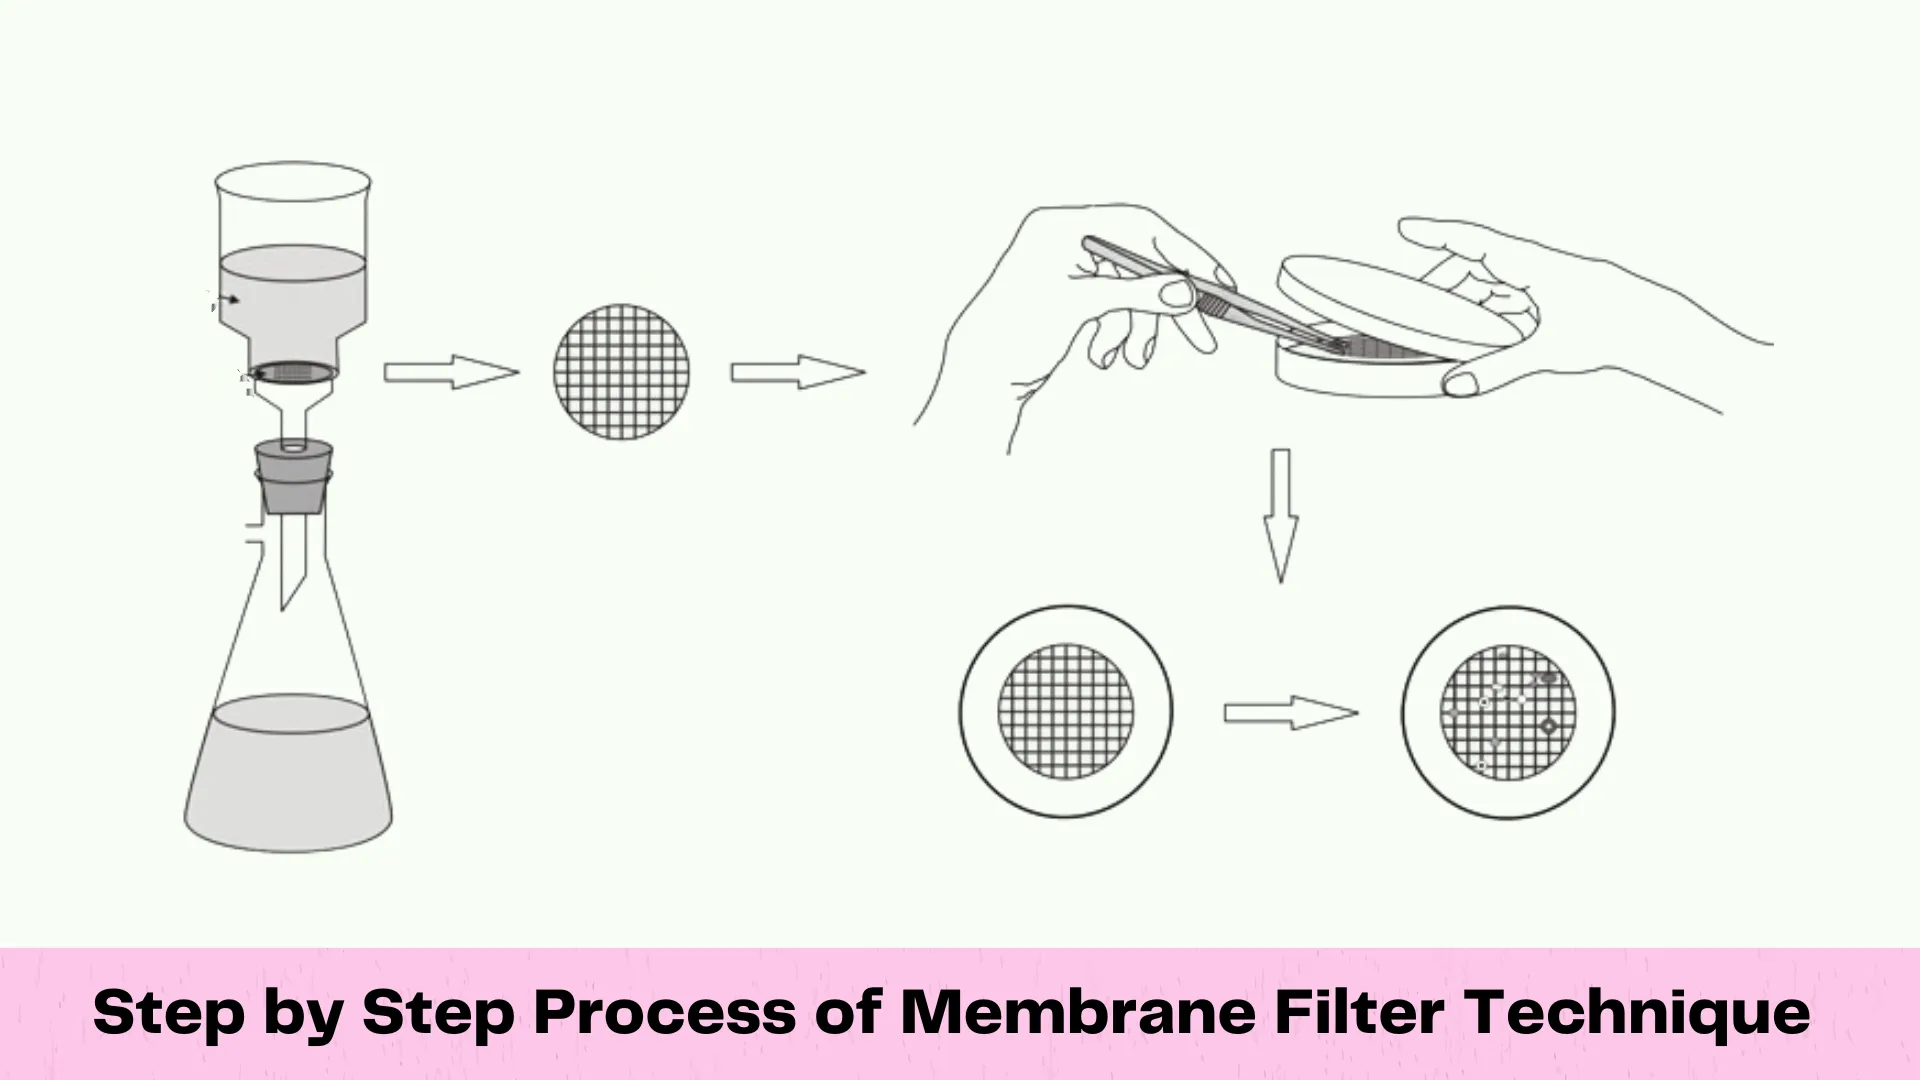 Step by step of membrane filter technique 